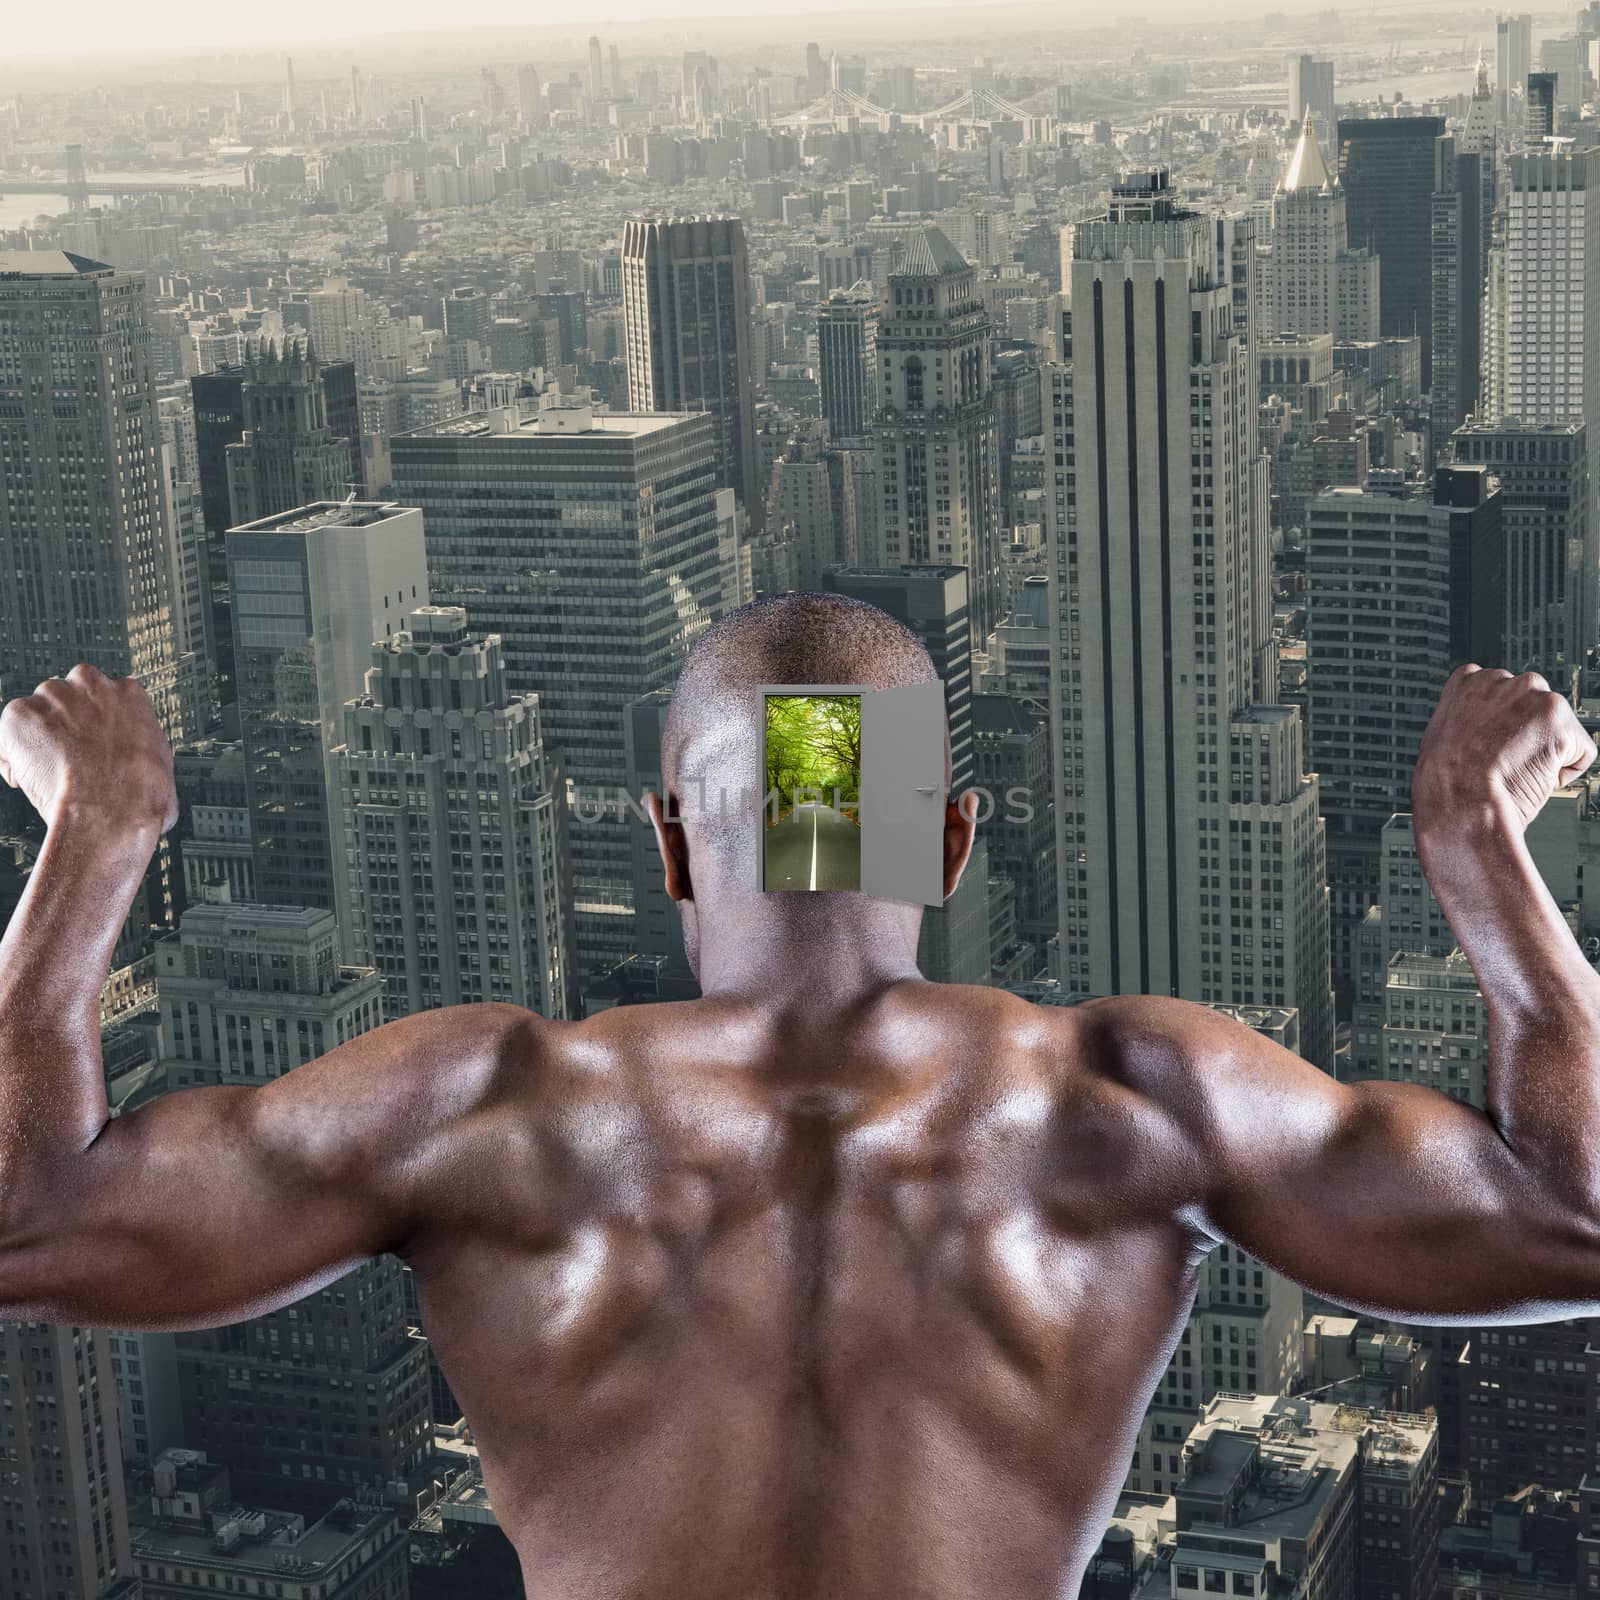 Composite image of rear view of muscular athlete posing by Wavebreakmedia